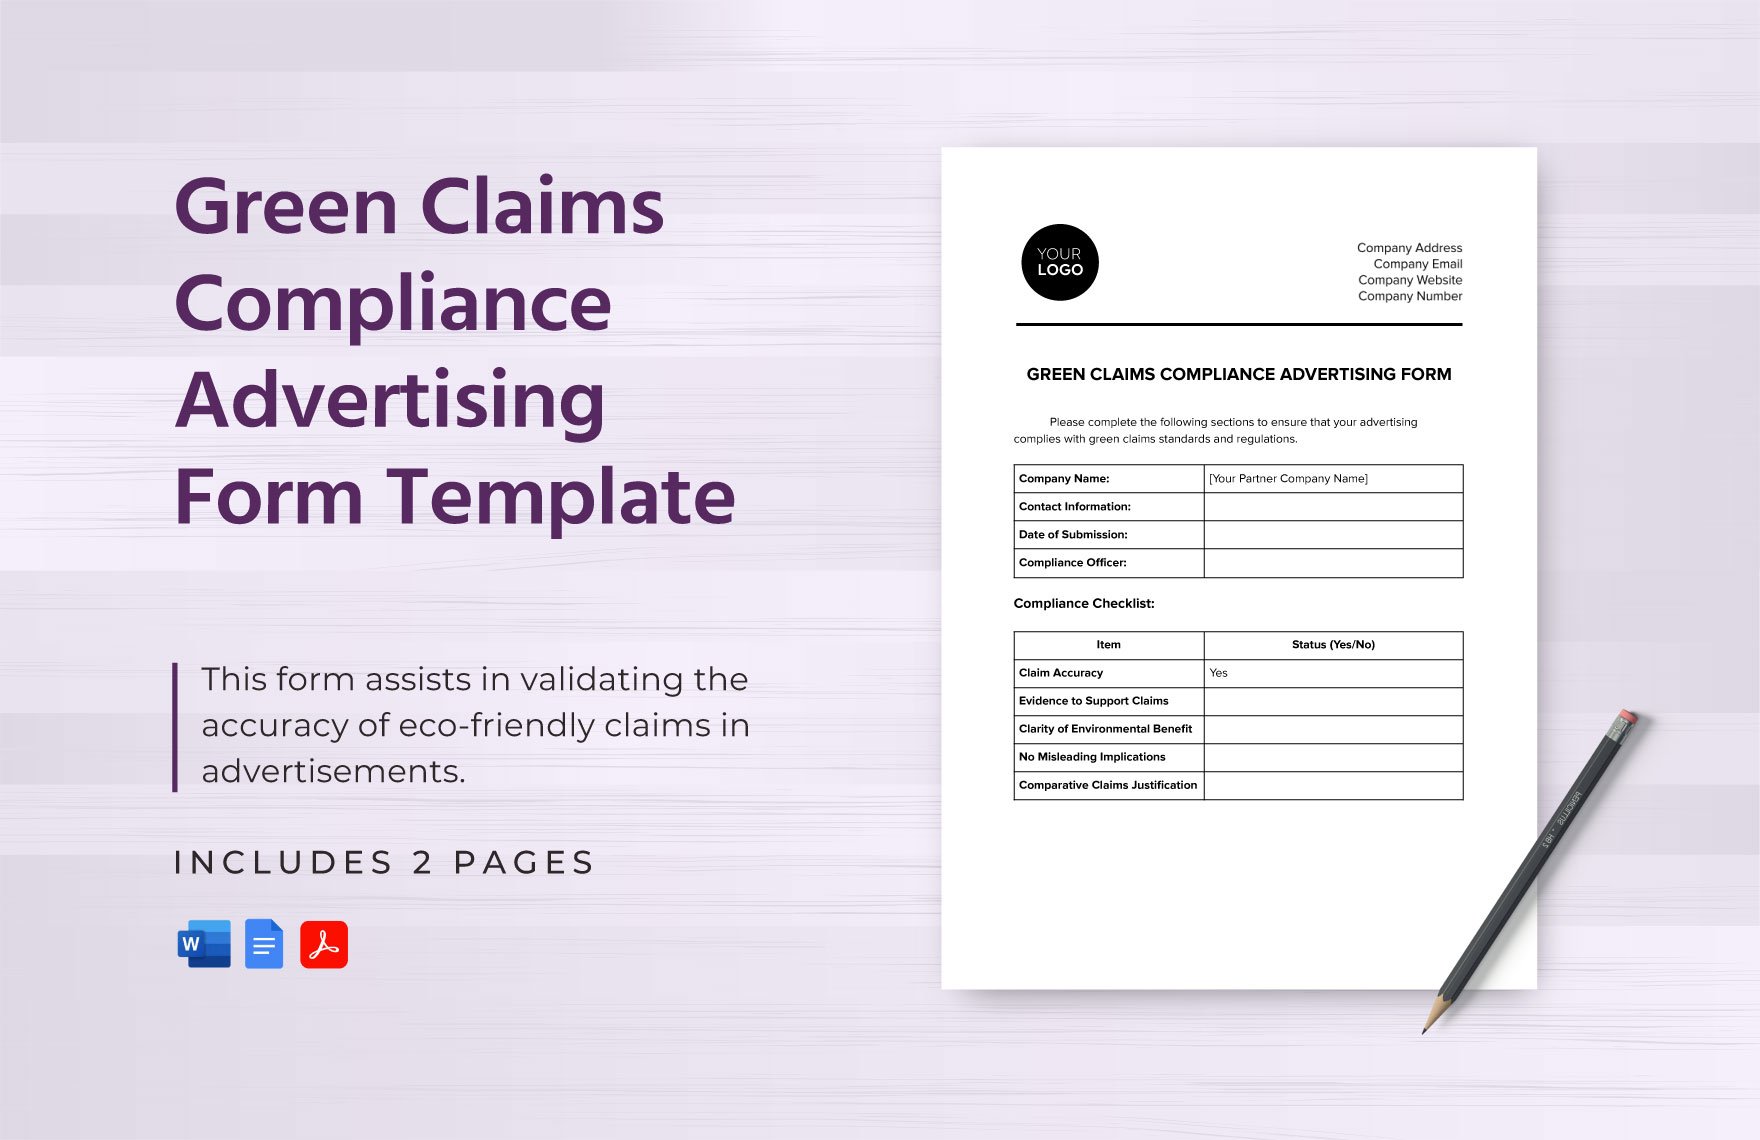 Green Claims Compliance Advertising Form Template in Word, Google Docs, PDF